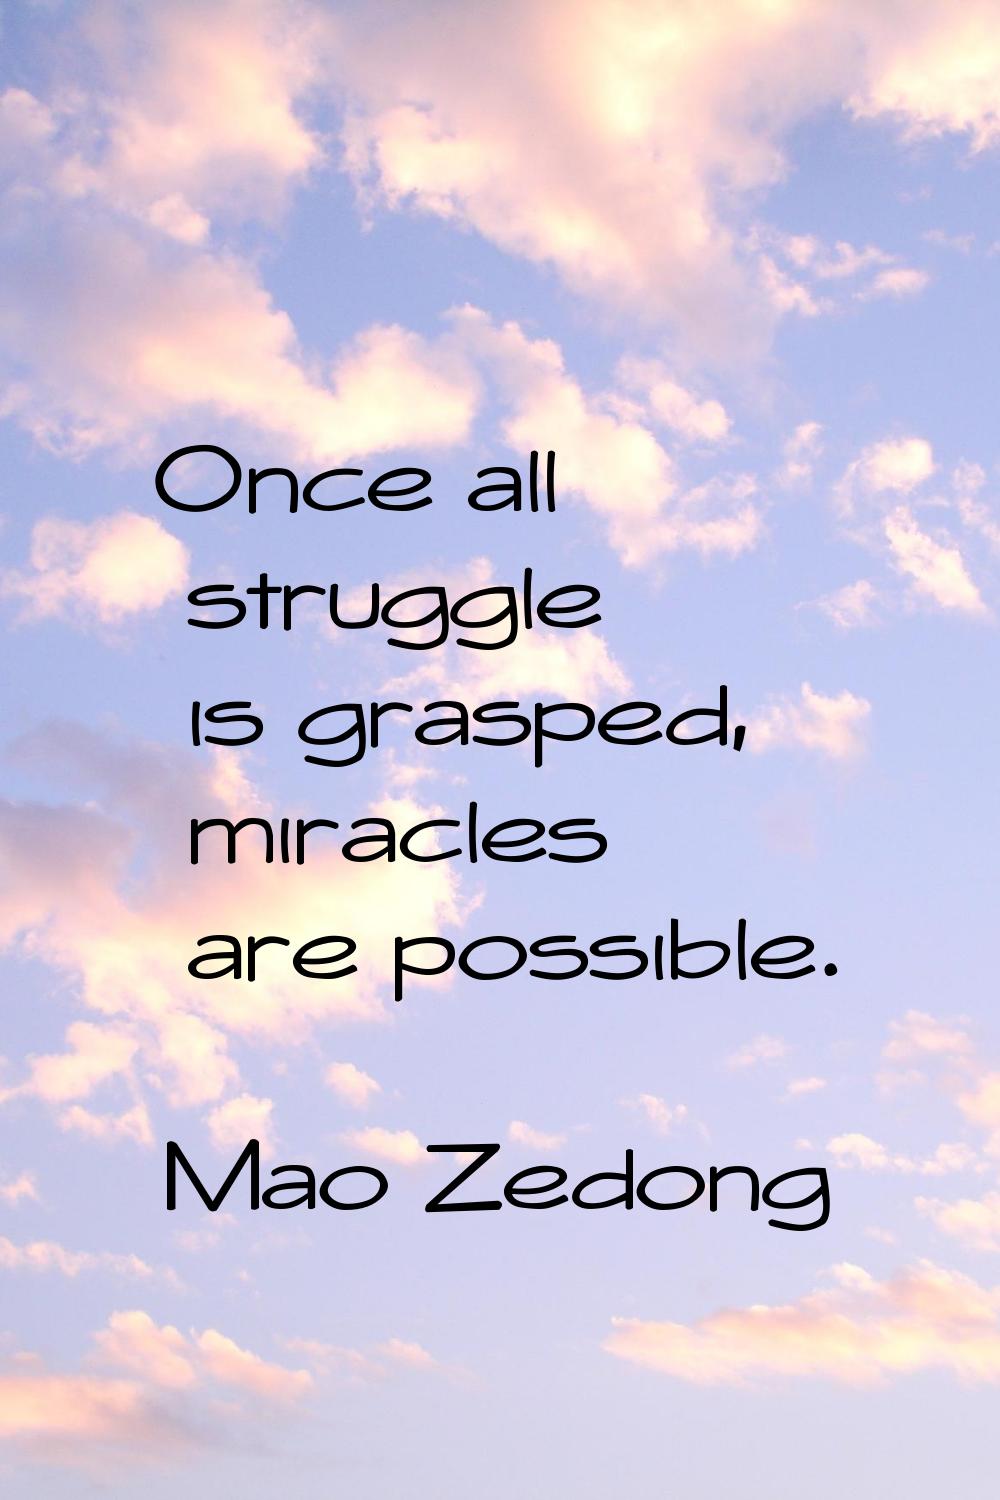 Once all struggle is grasped, miracles are possible.